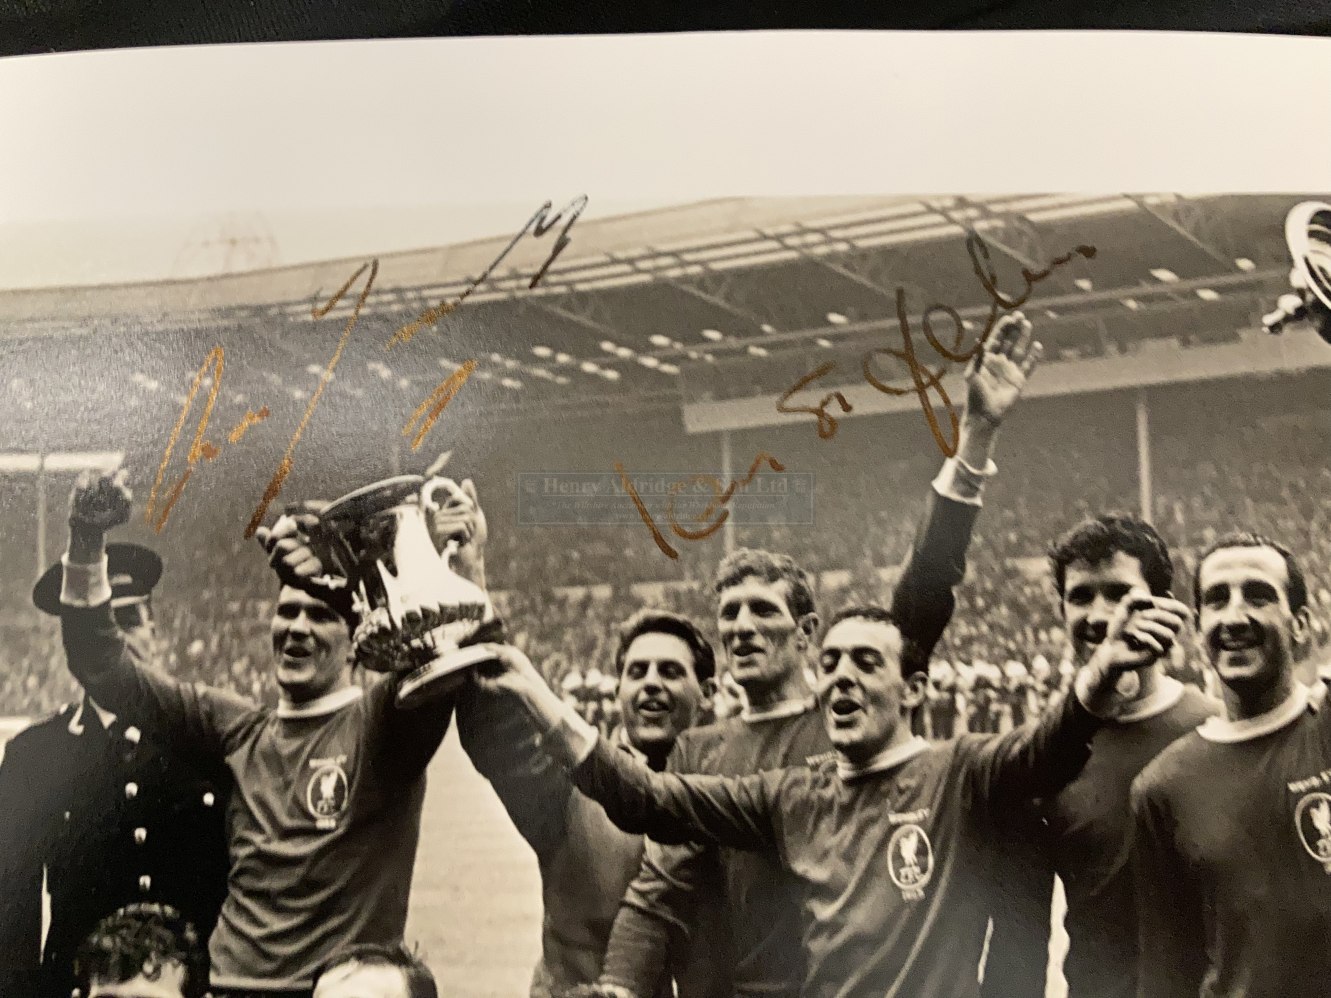 Football: Liverpool, three silver gelatin photographs of 1965 Cup Final, all signed by Ian St. John, - Image 5 of 6